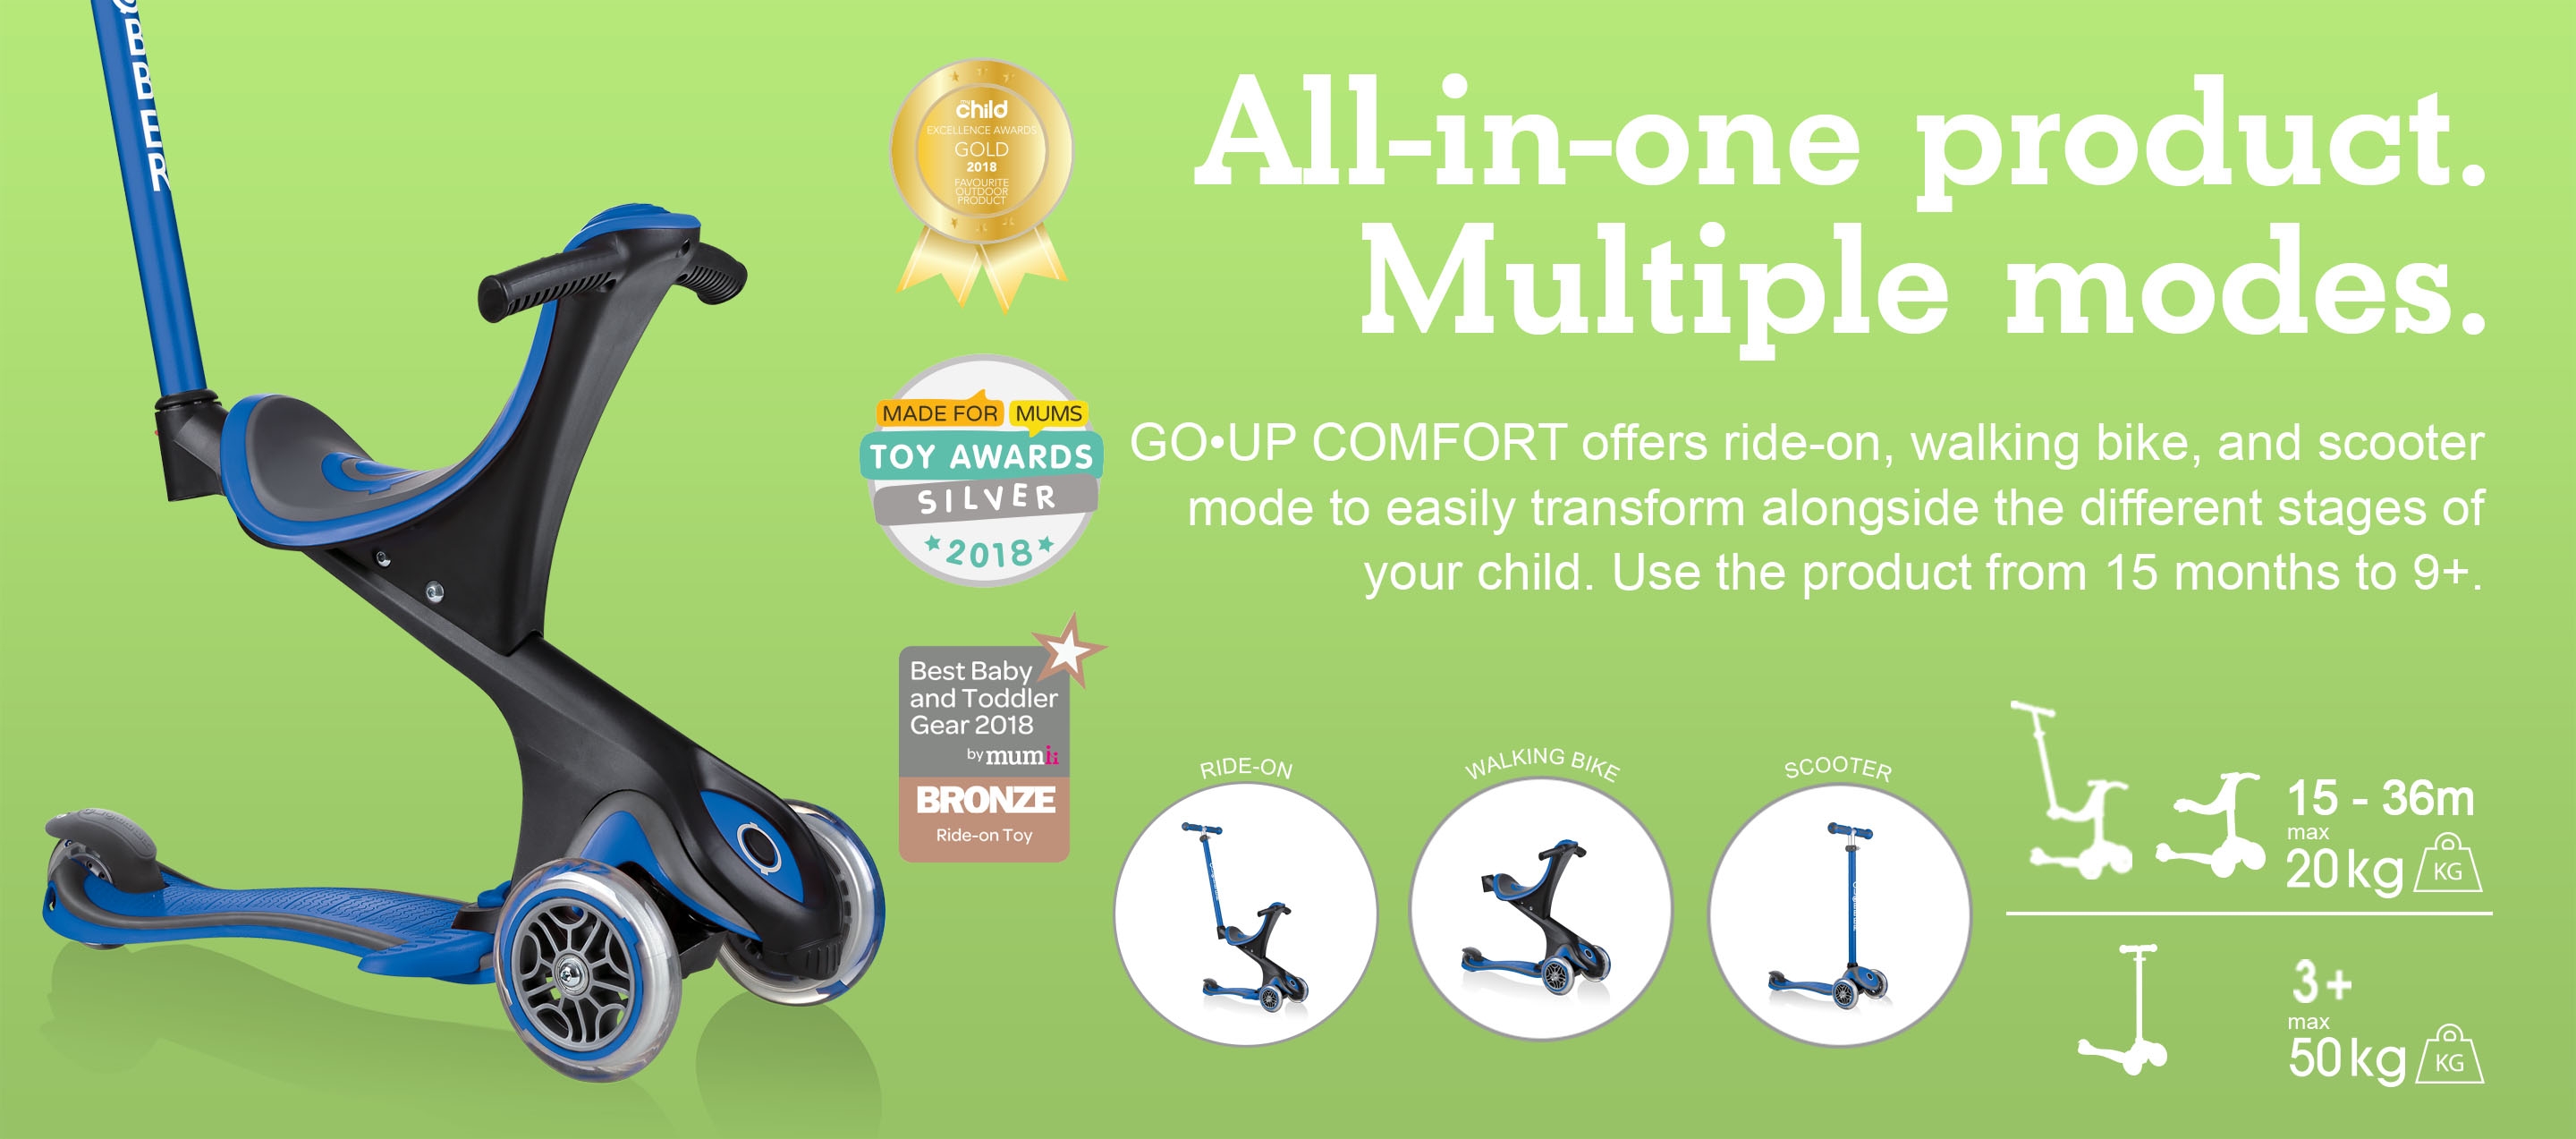 All-in-one product. Multiple modes. 